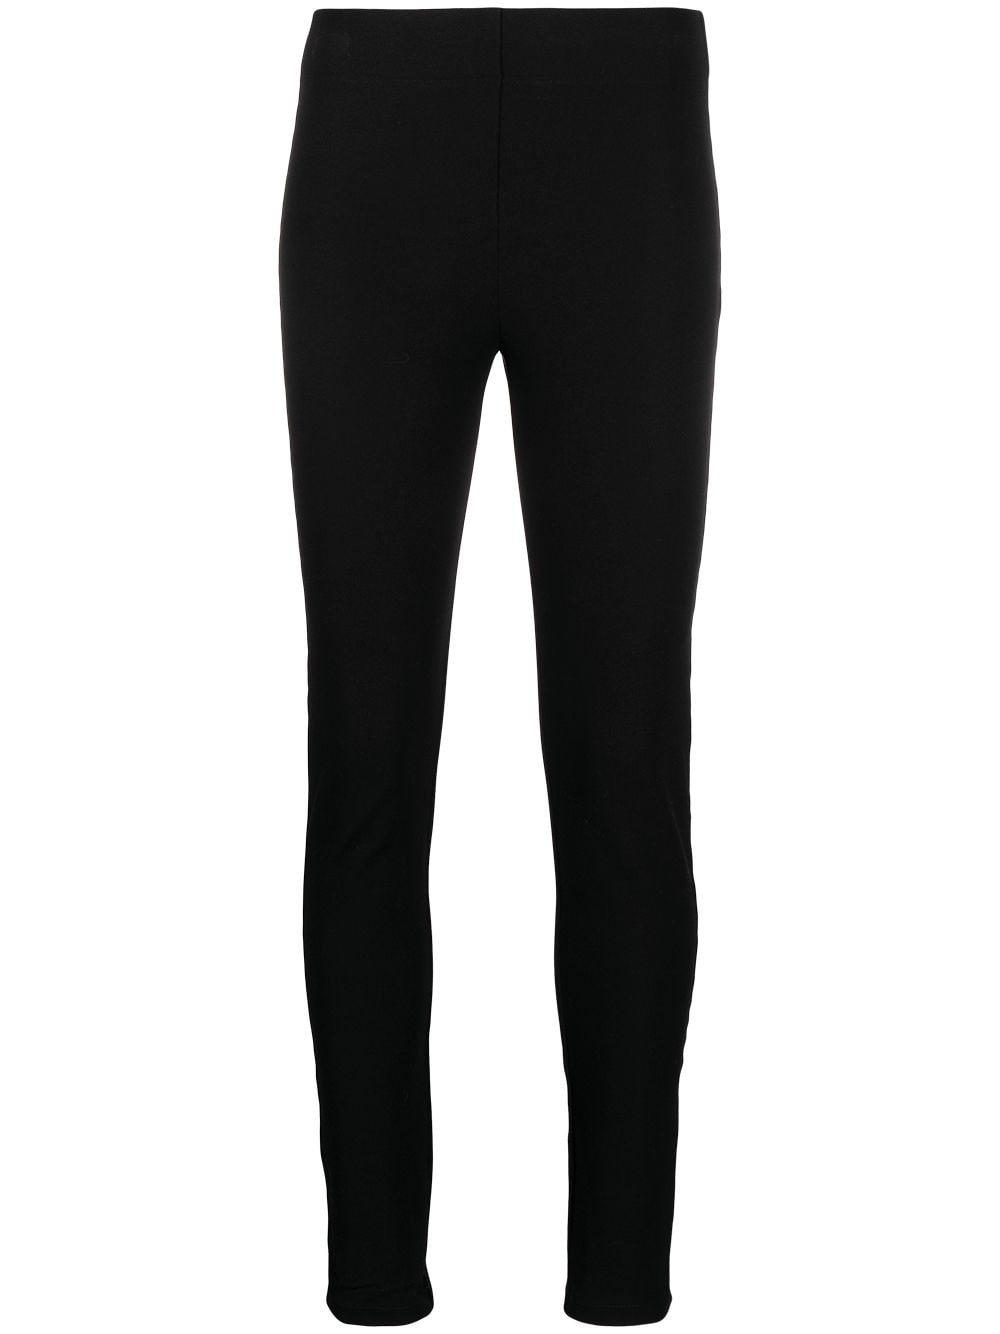 high-rise fitted leggings - 1